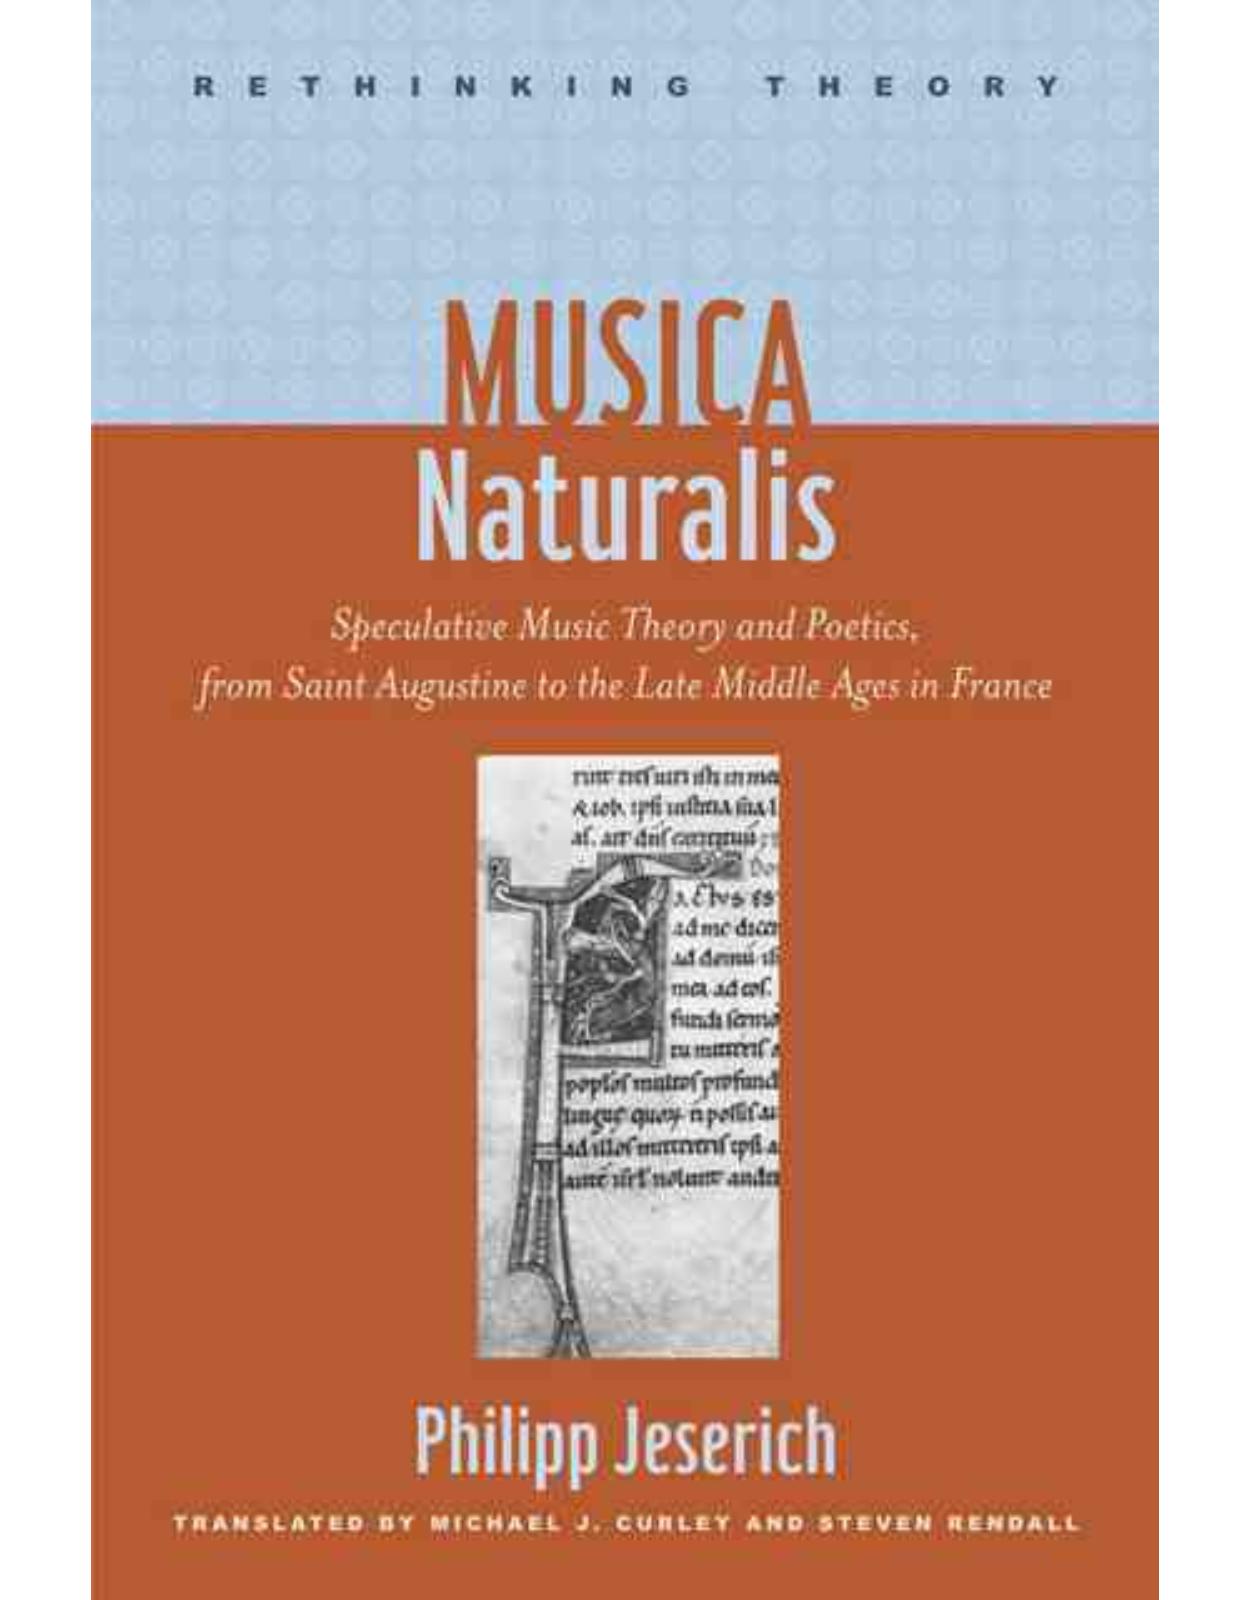 Musica Naturalis. Speculative Music Theory and Poetics, from Saint Augustine to the Late Middle Ages in France